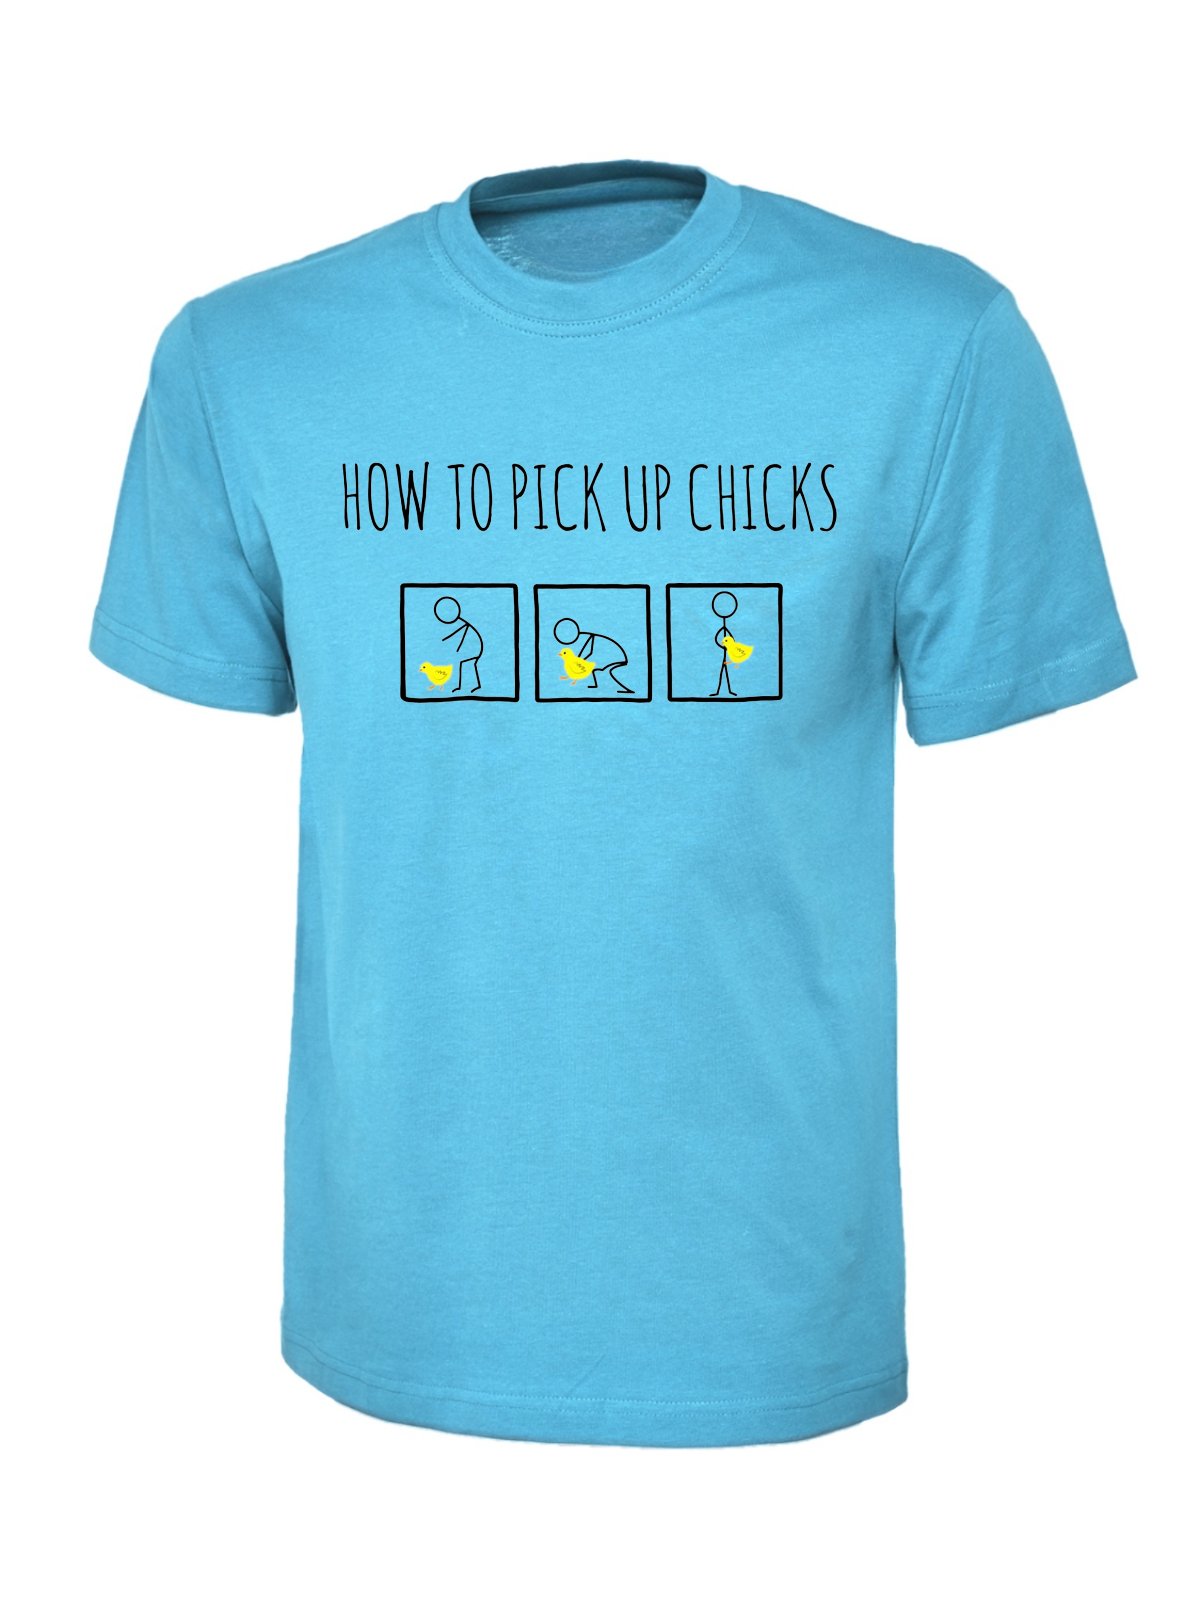 "How To Pick Chicks" Tee - Wow T-Shirts